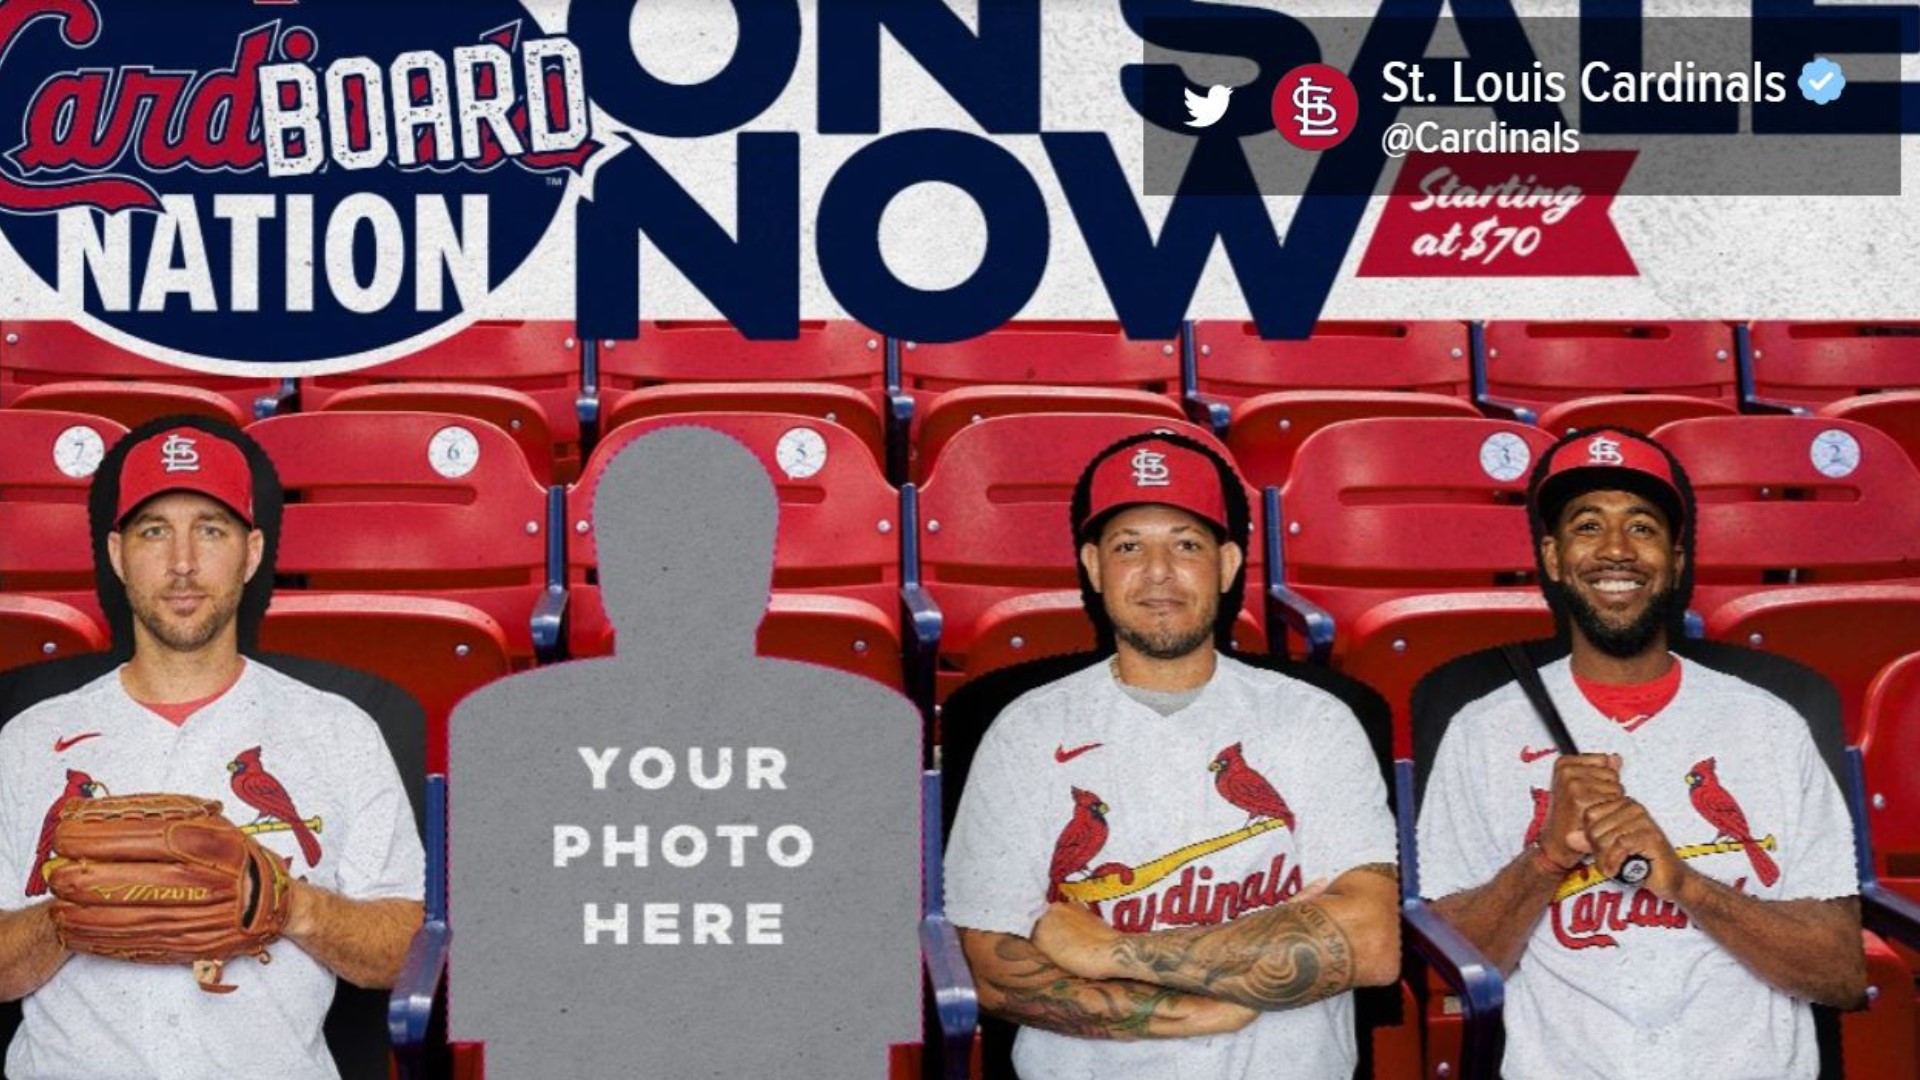 The Cardinals have come up with a stand-in for fans who are missing the live baseball experience